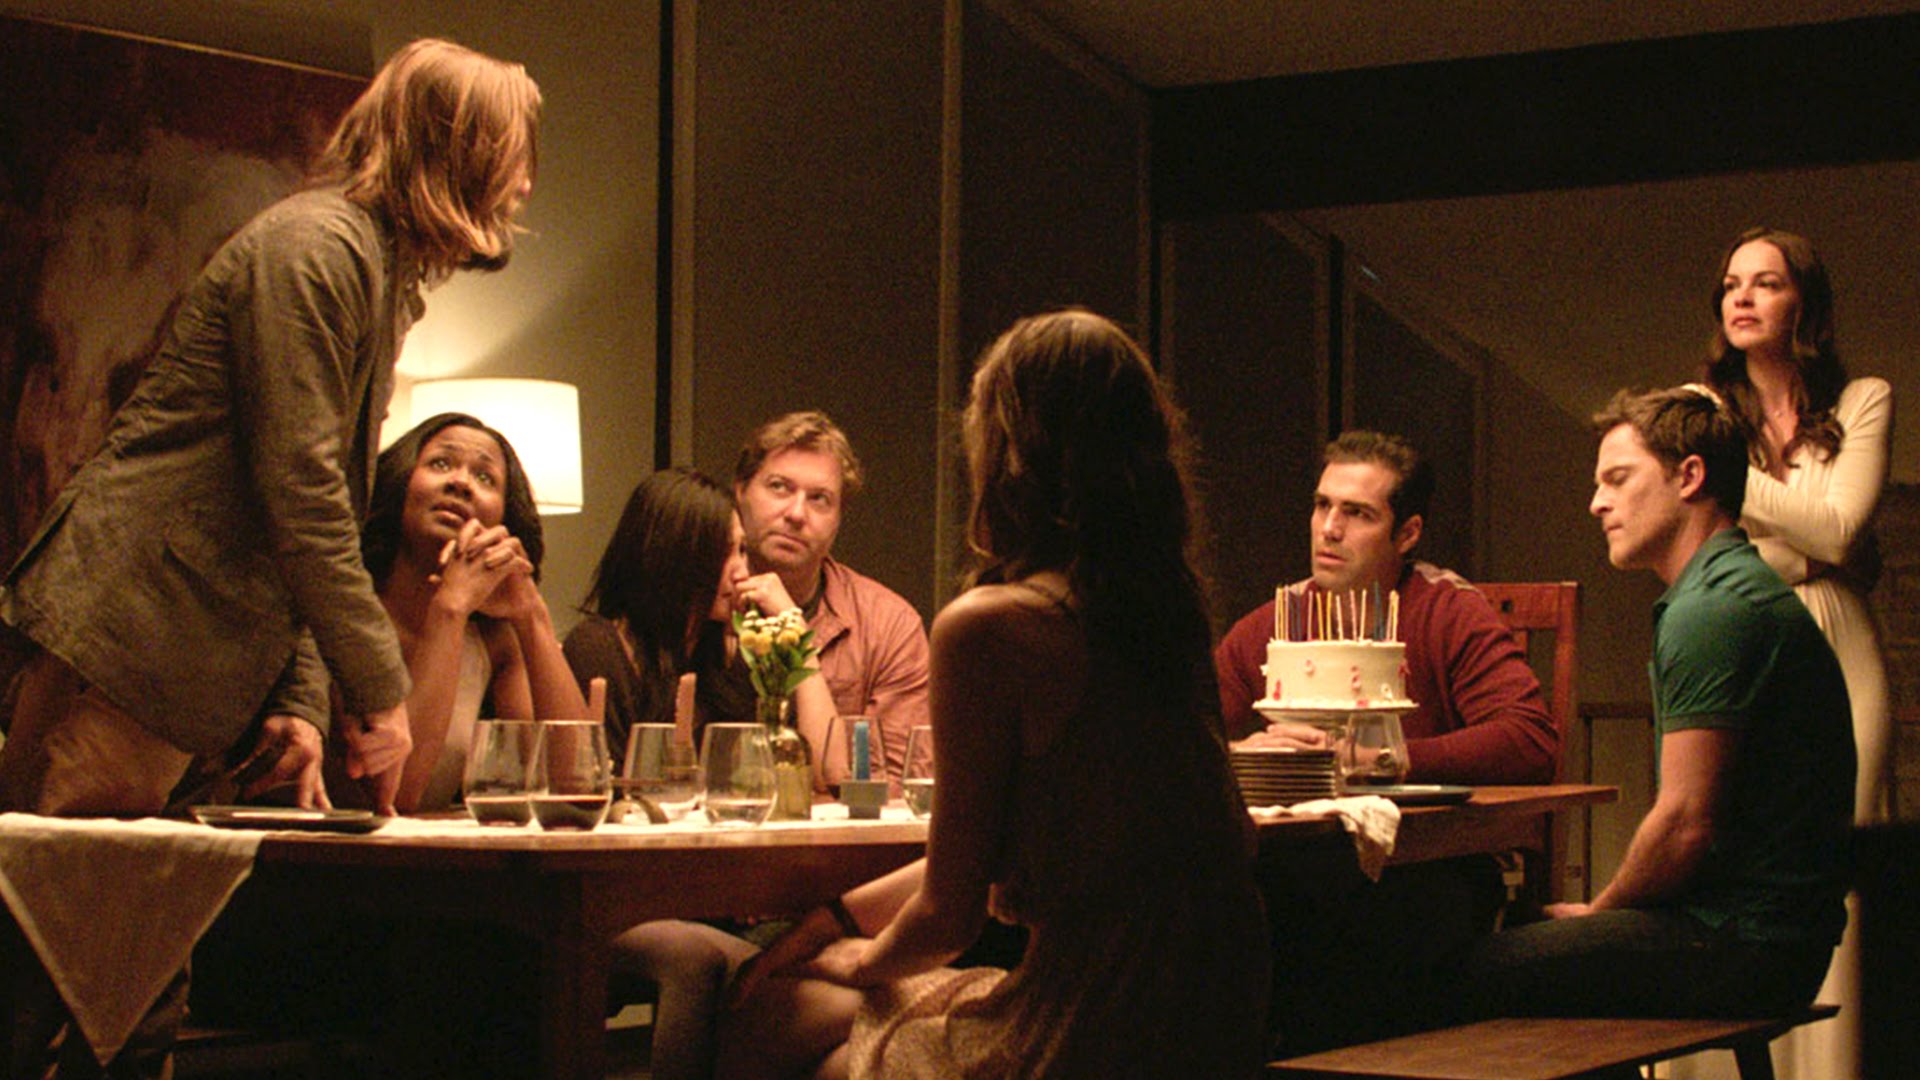 This is a still from The Invitation.